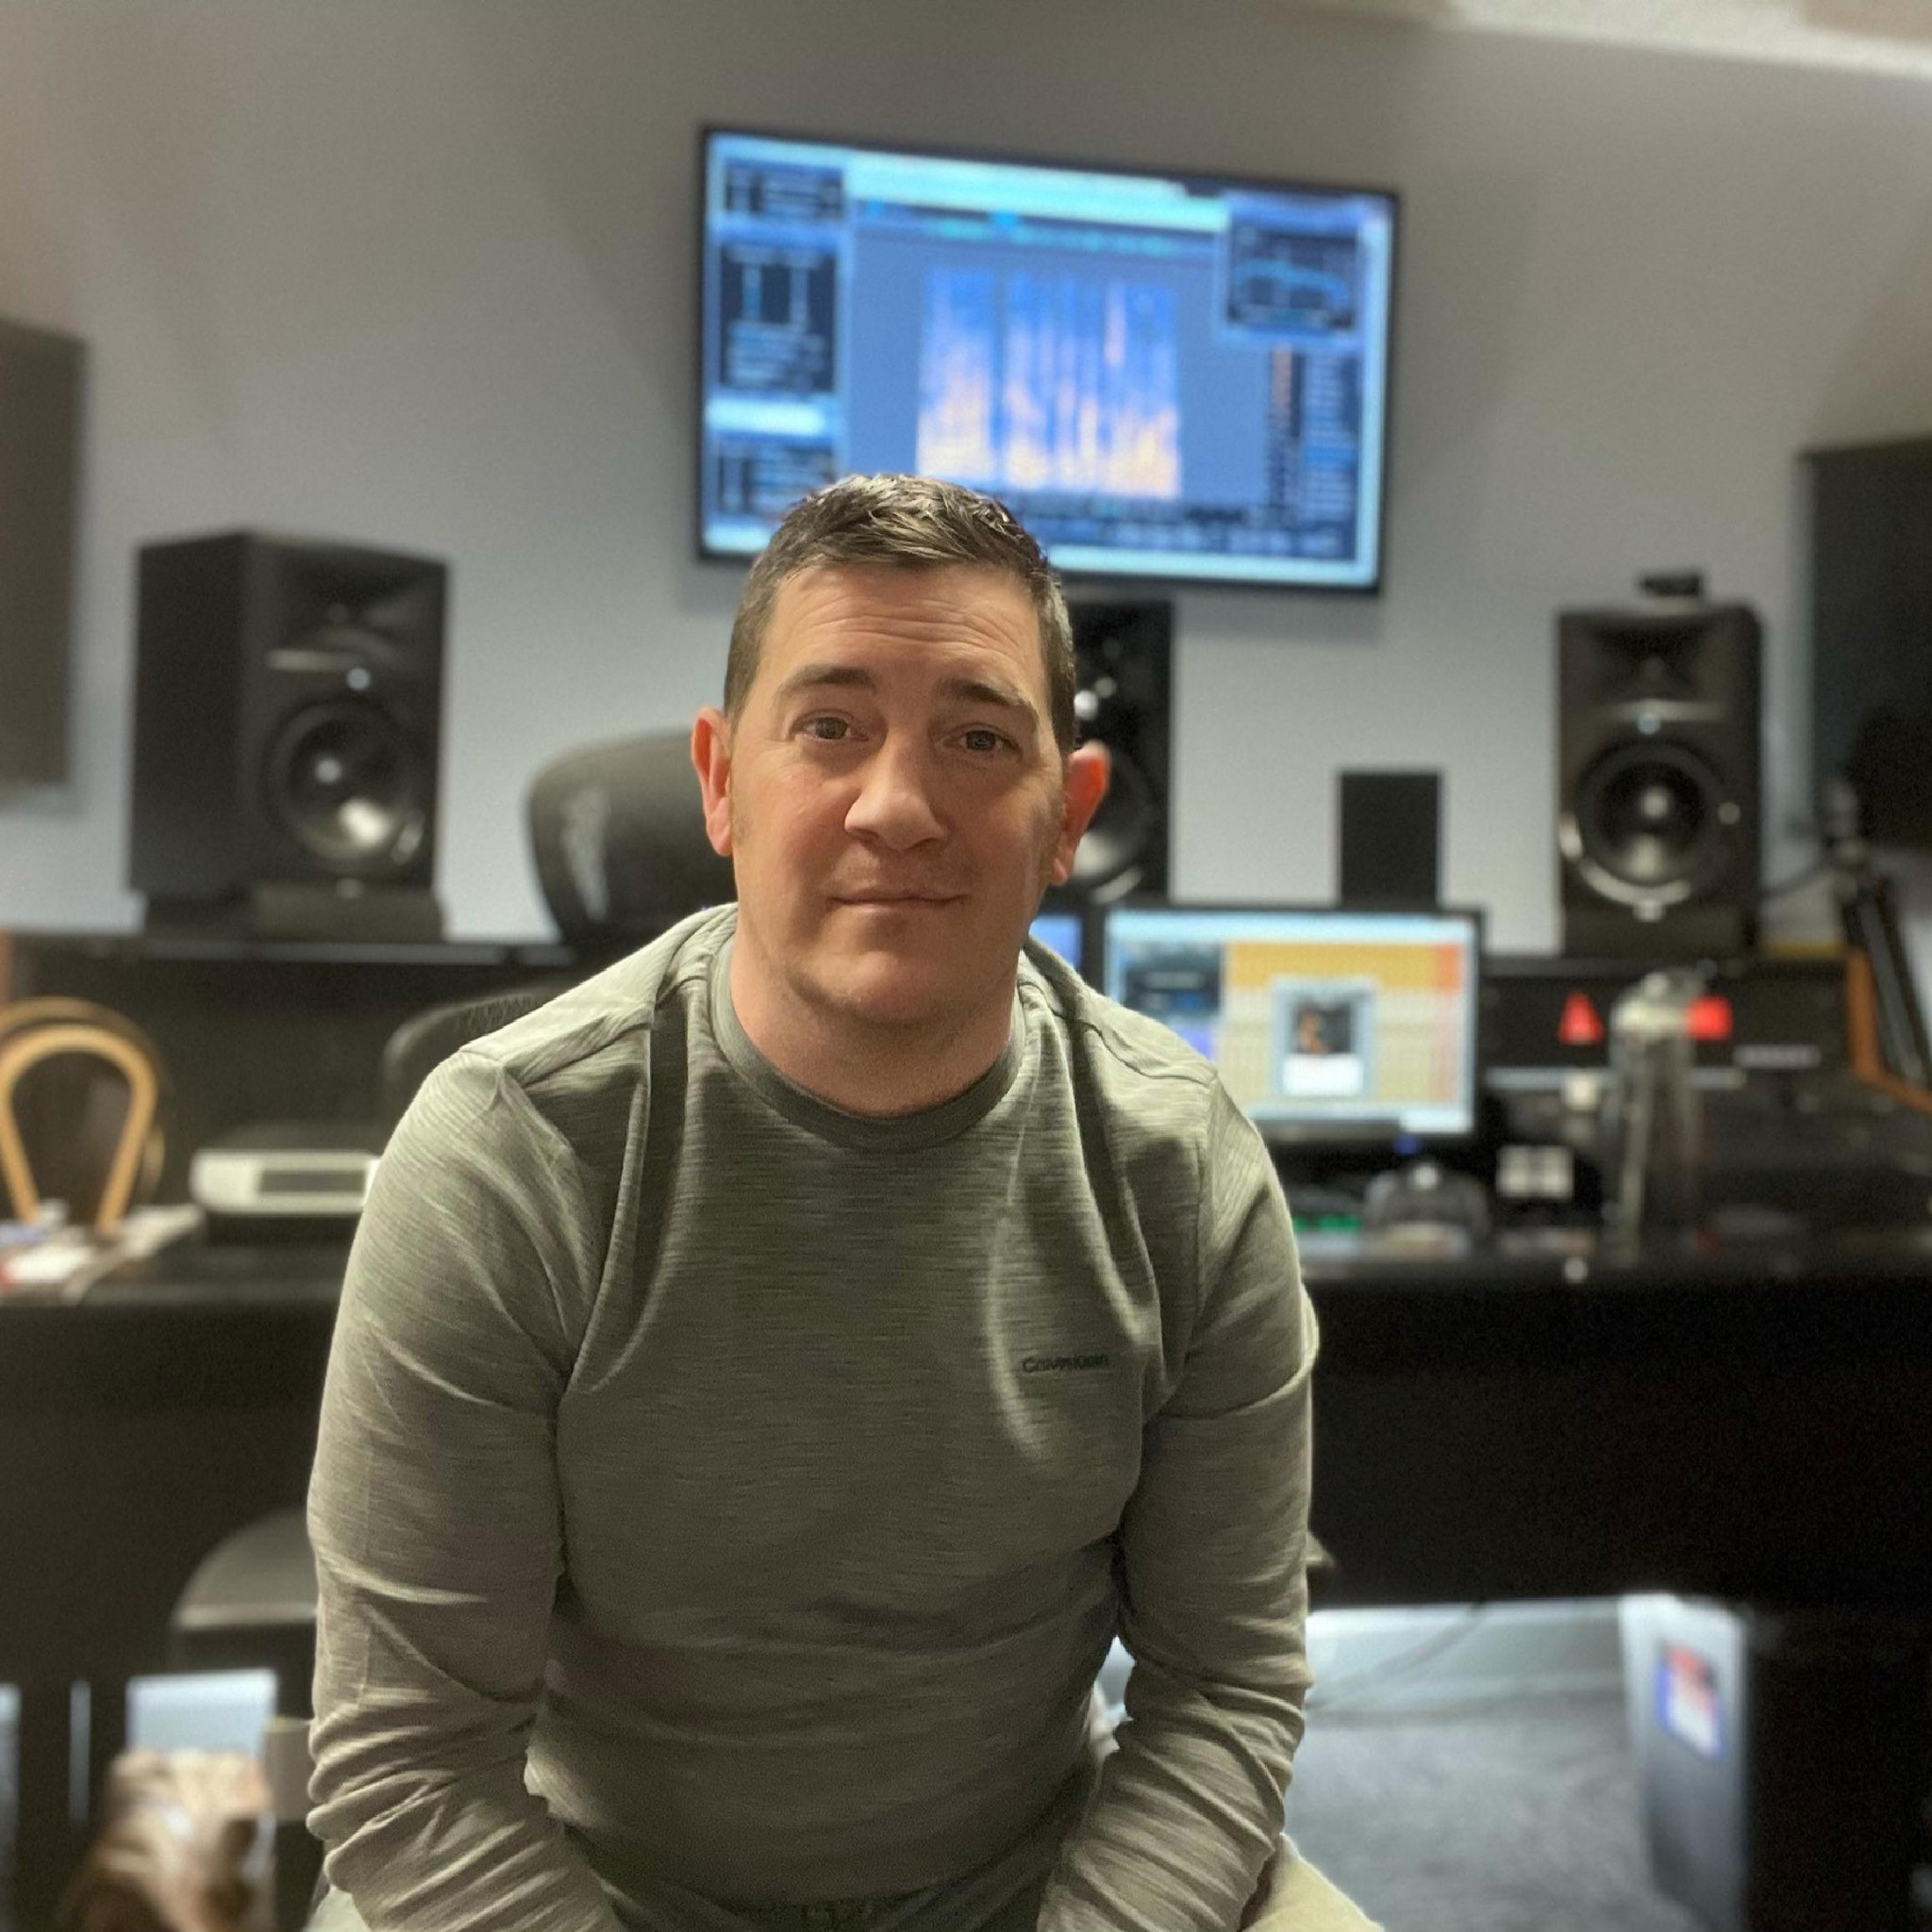 3 Days Rising sound designer, Bob Pepek, owner of MelonCollie Productions